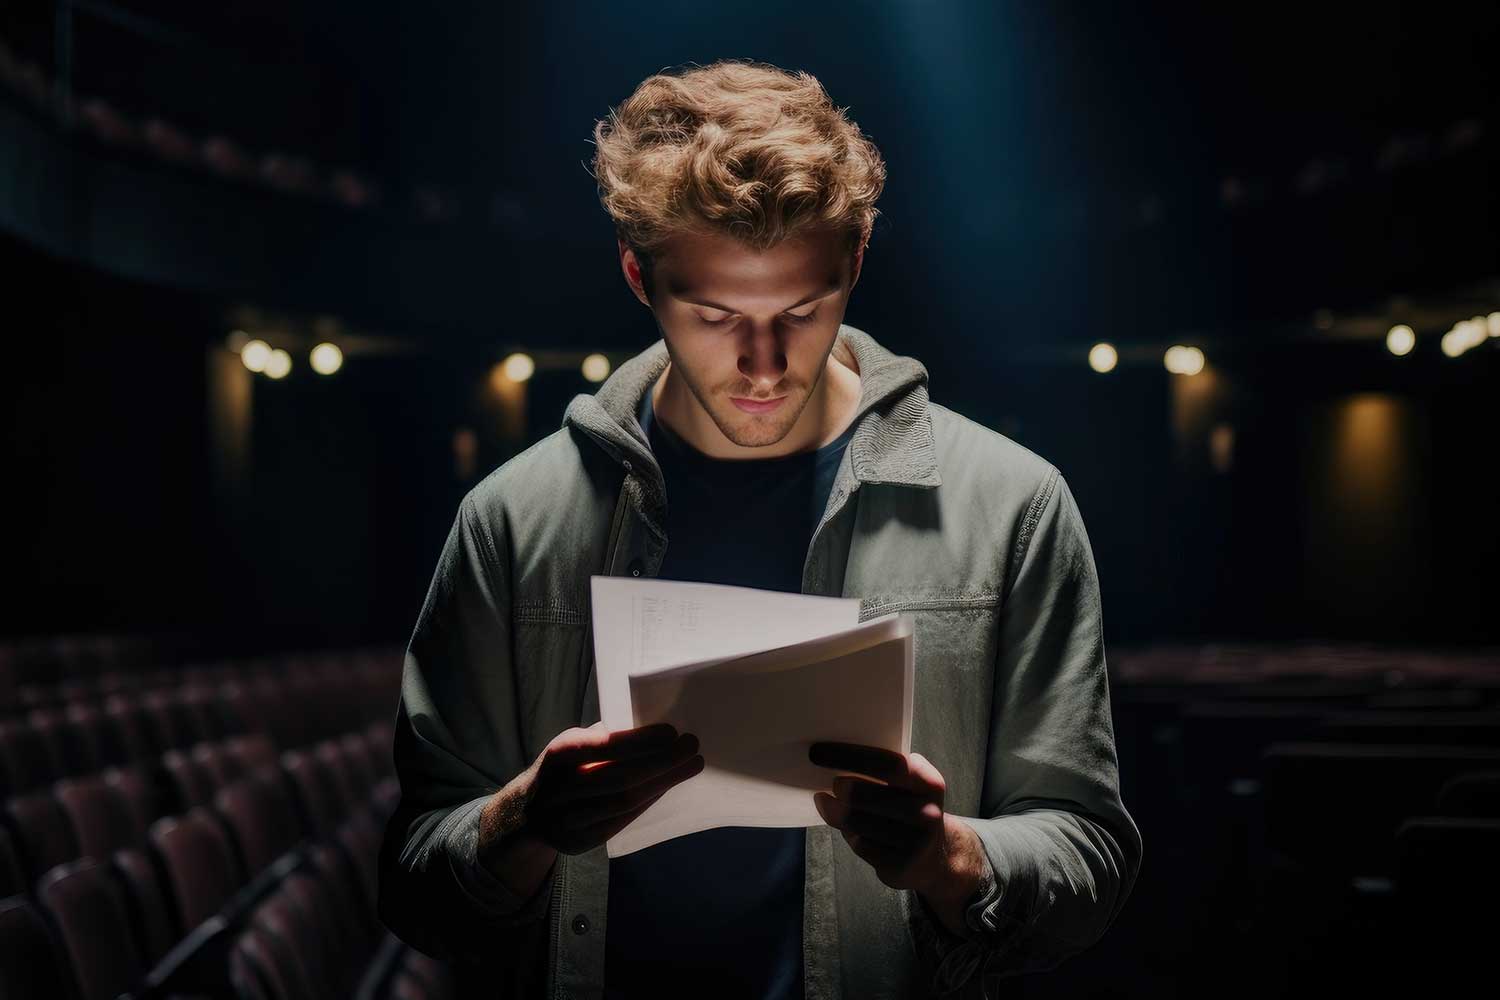 An actor reads a script in a theatre